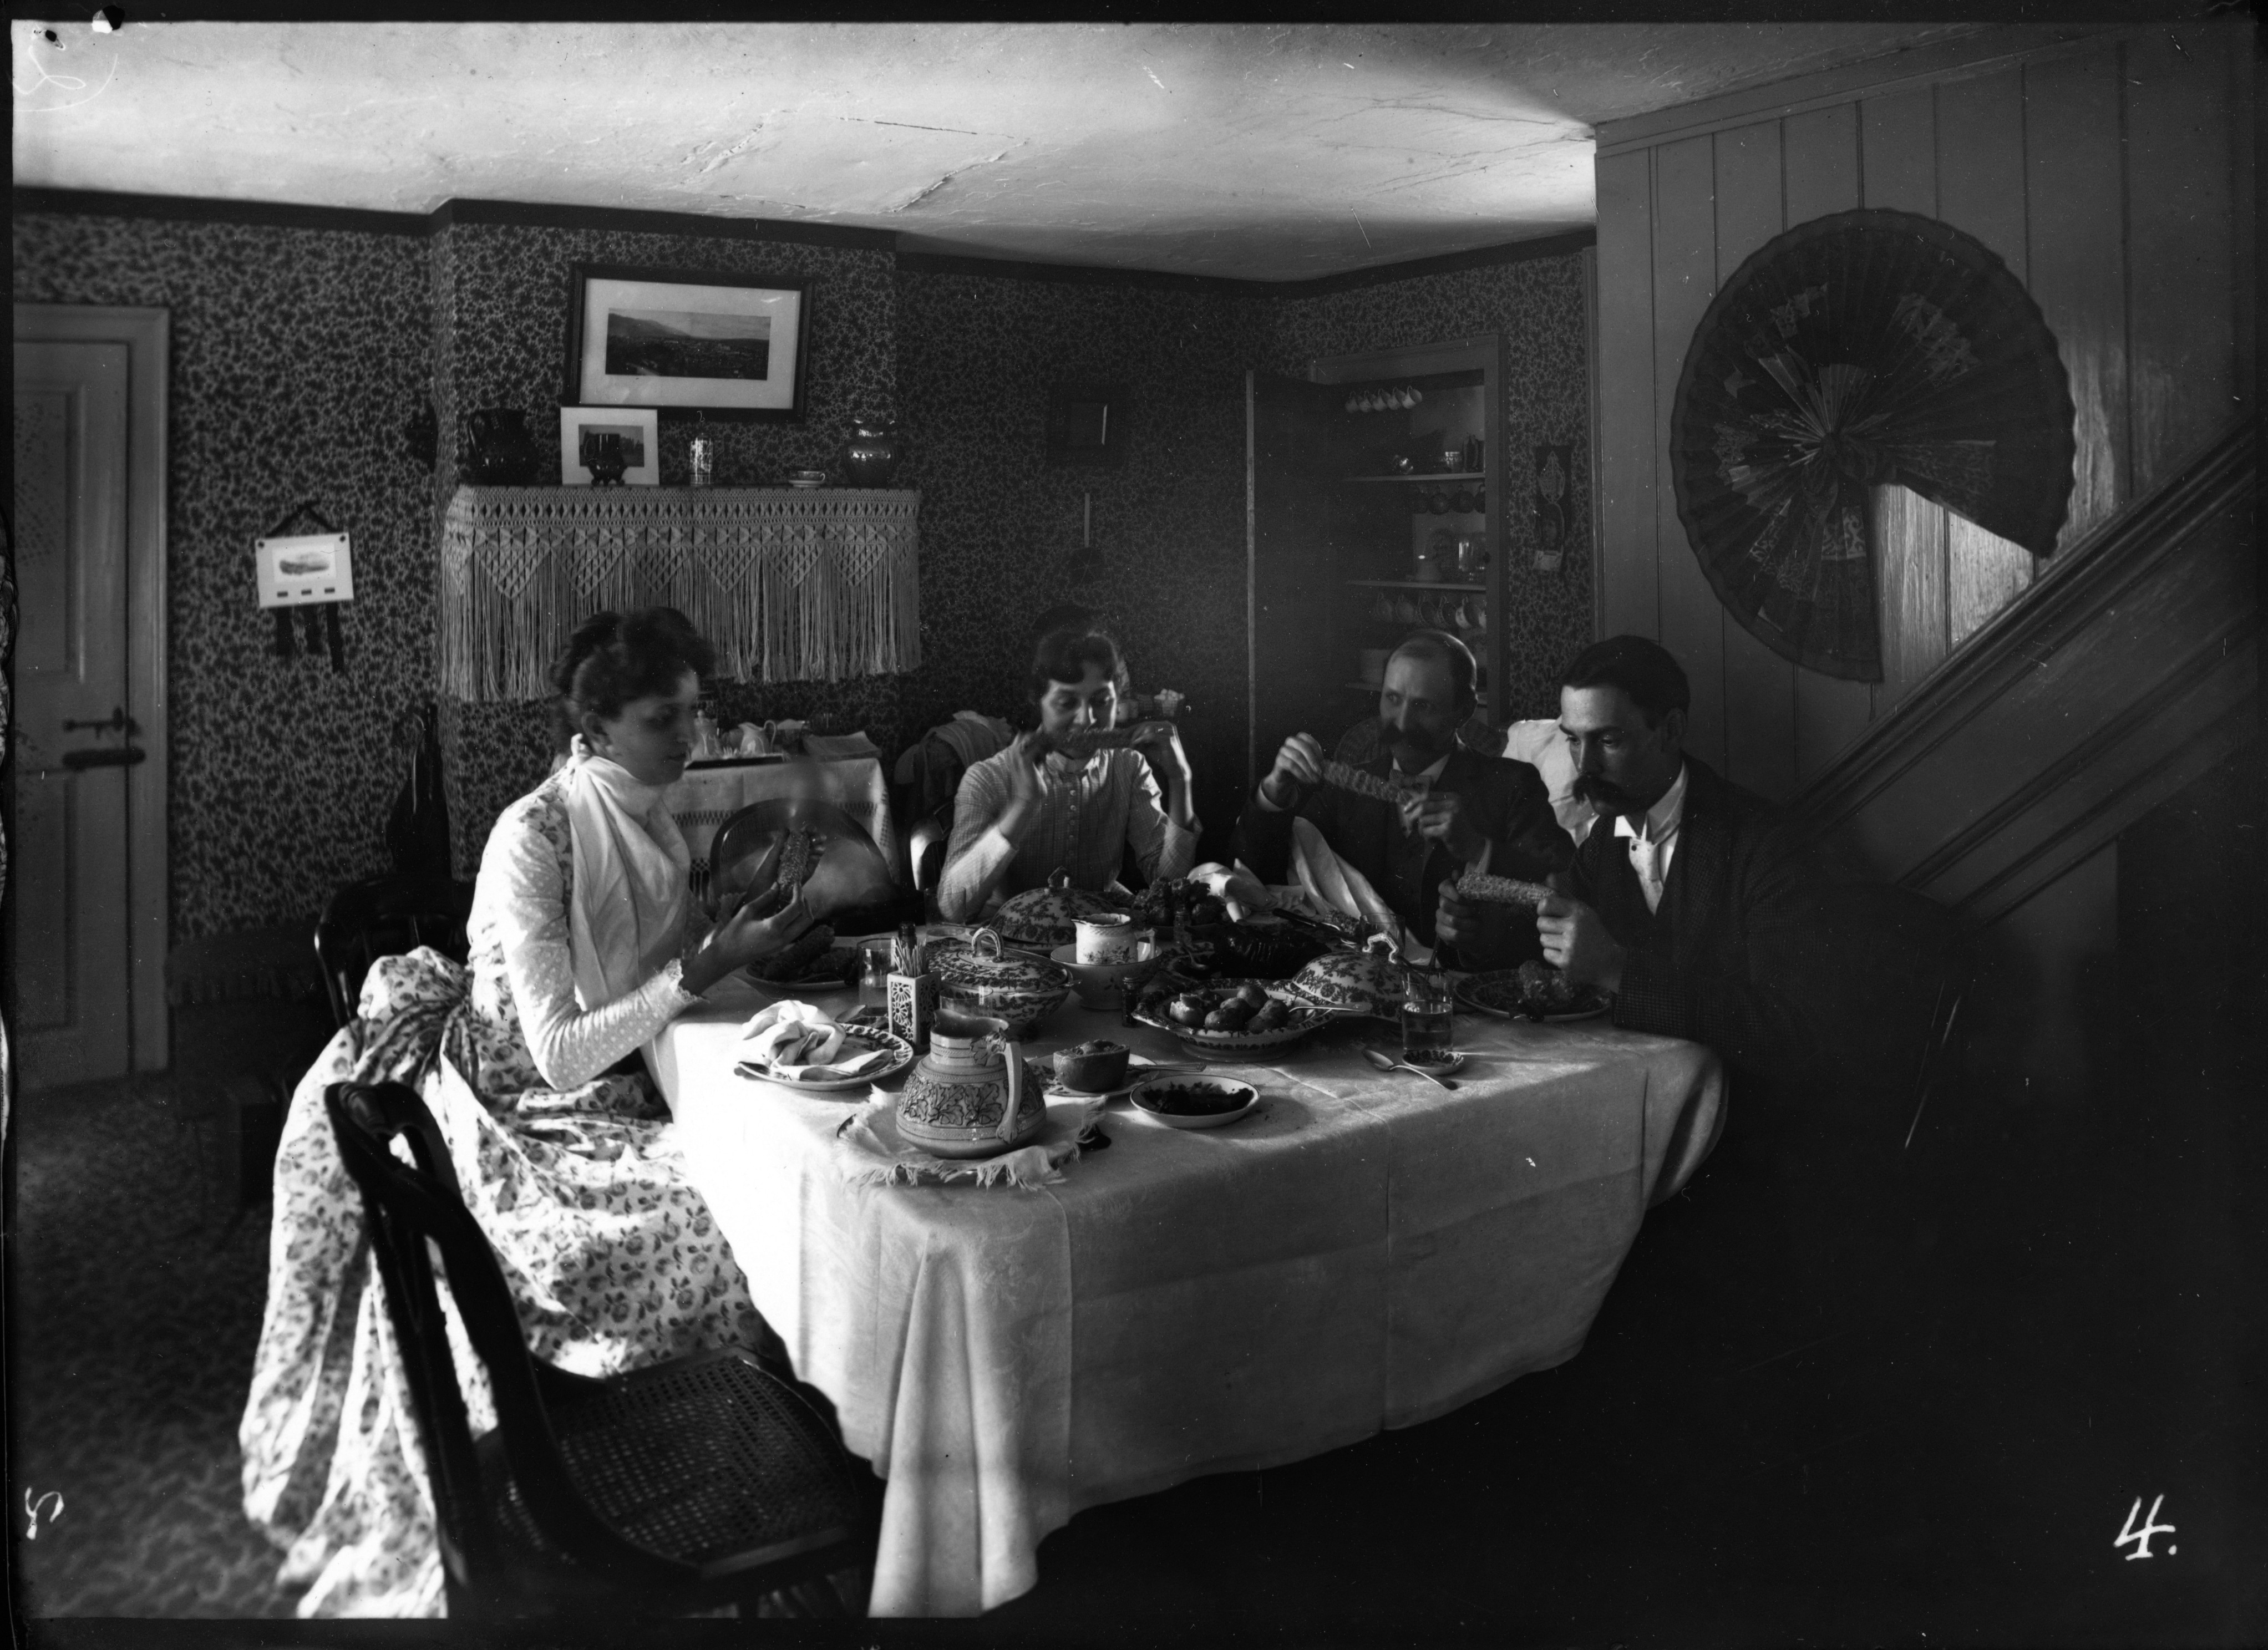 Black and white negative of two men and two women sharing a meal at a well-set table.